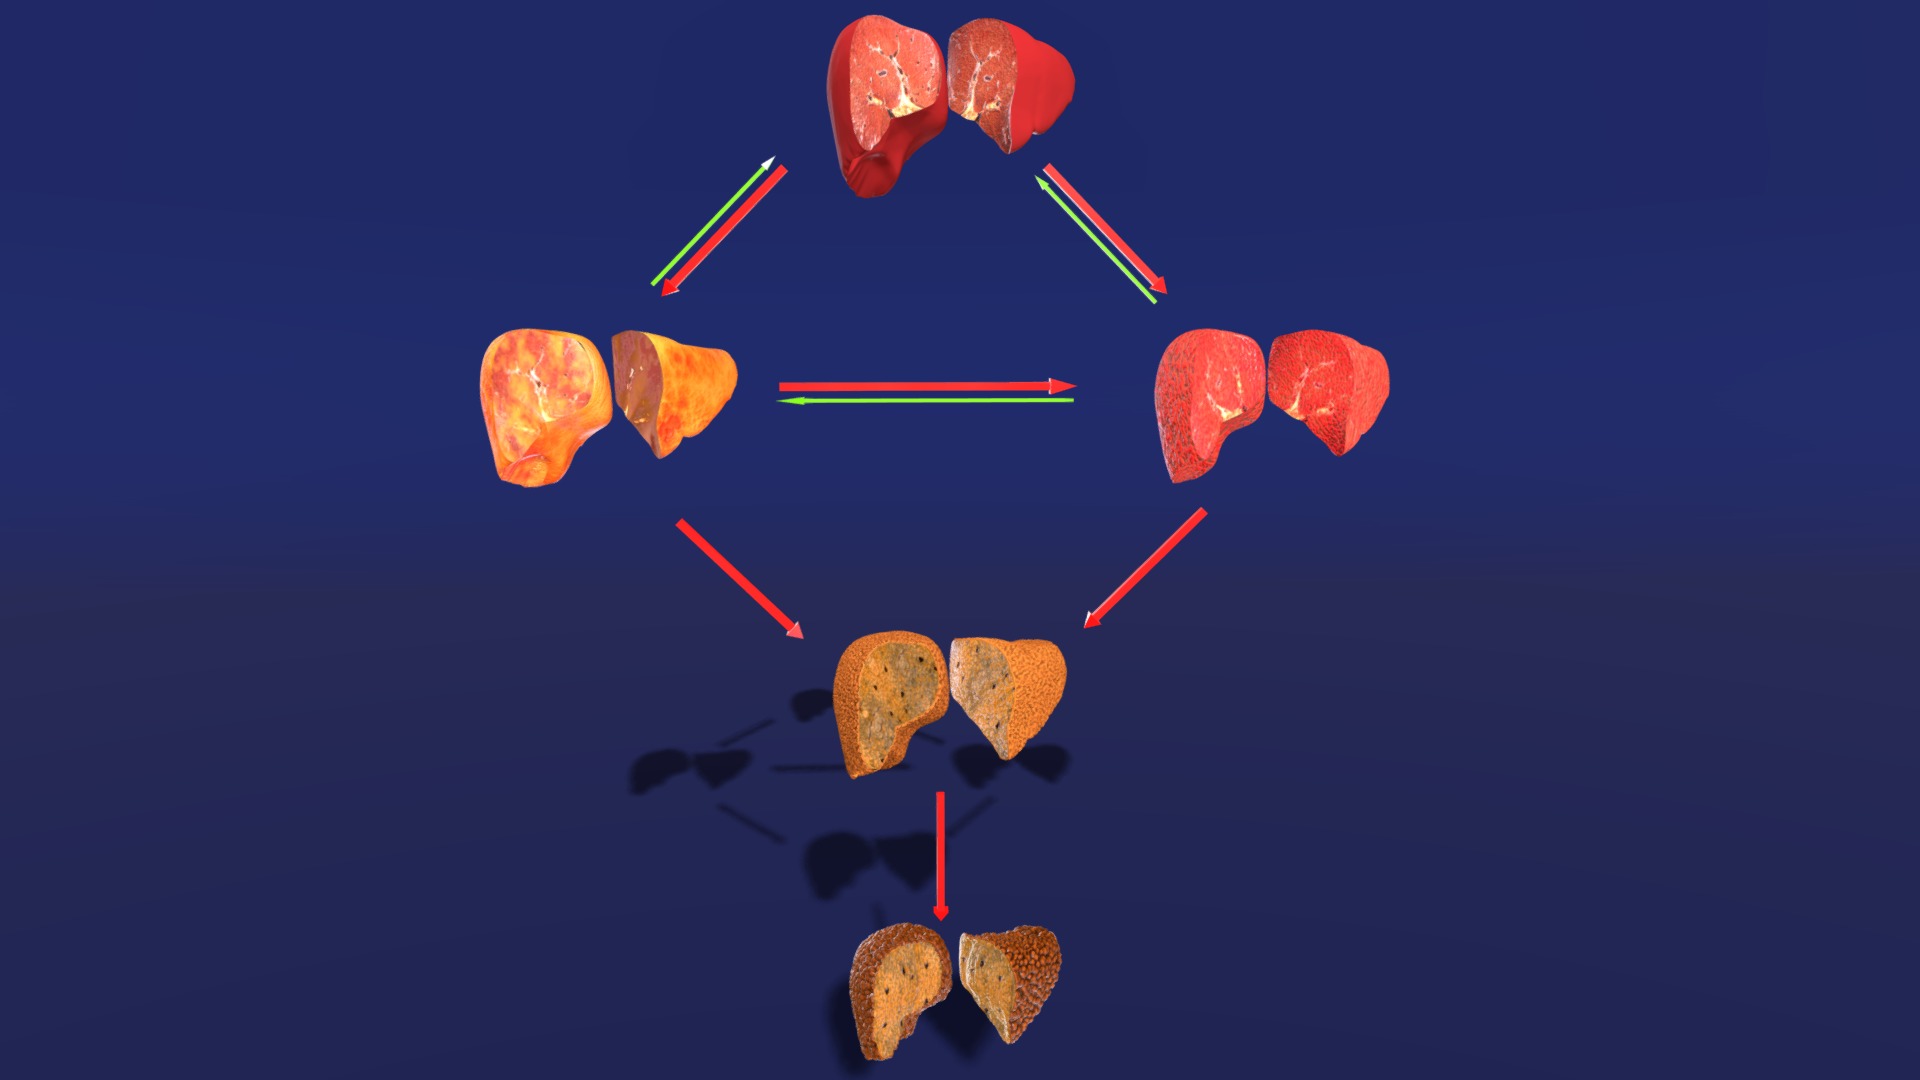 3D model Alchoholic Liver Disease Cirrhosis Hepatitis Fat - This is a 3D model of the Alchoholic Liver Disease Cirrhosis Hepatitis Fat. The 3D model is about shape.